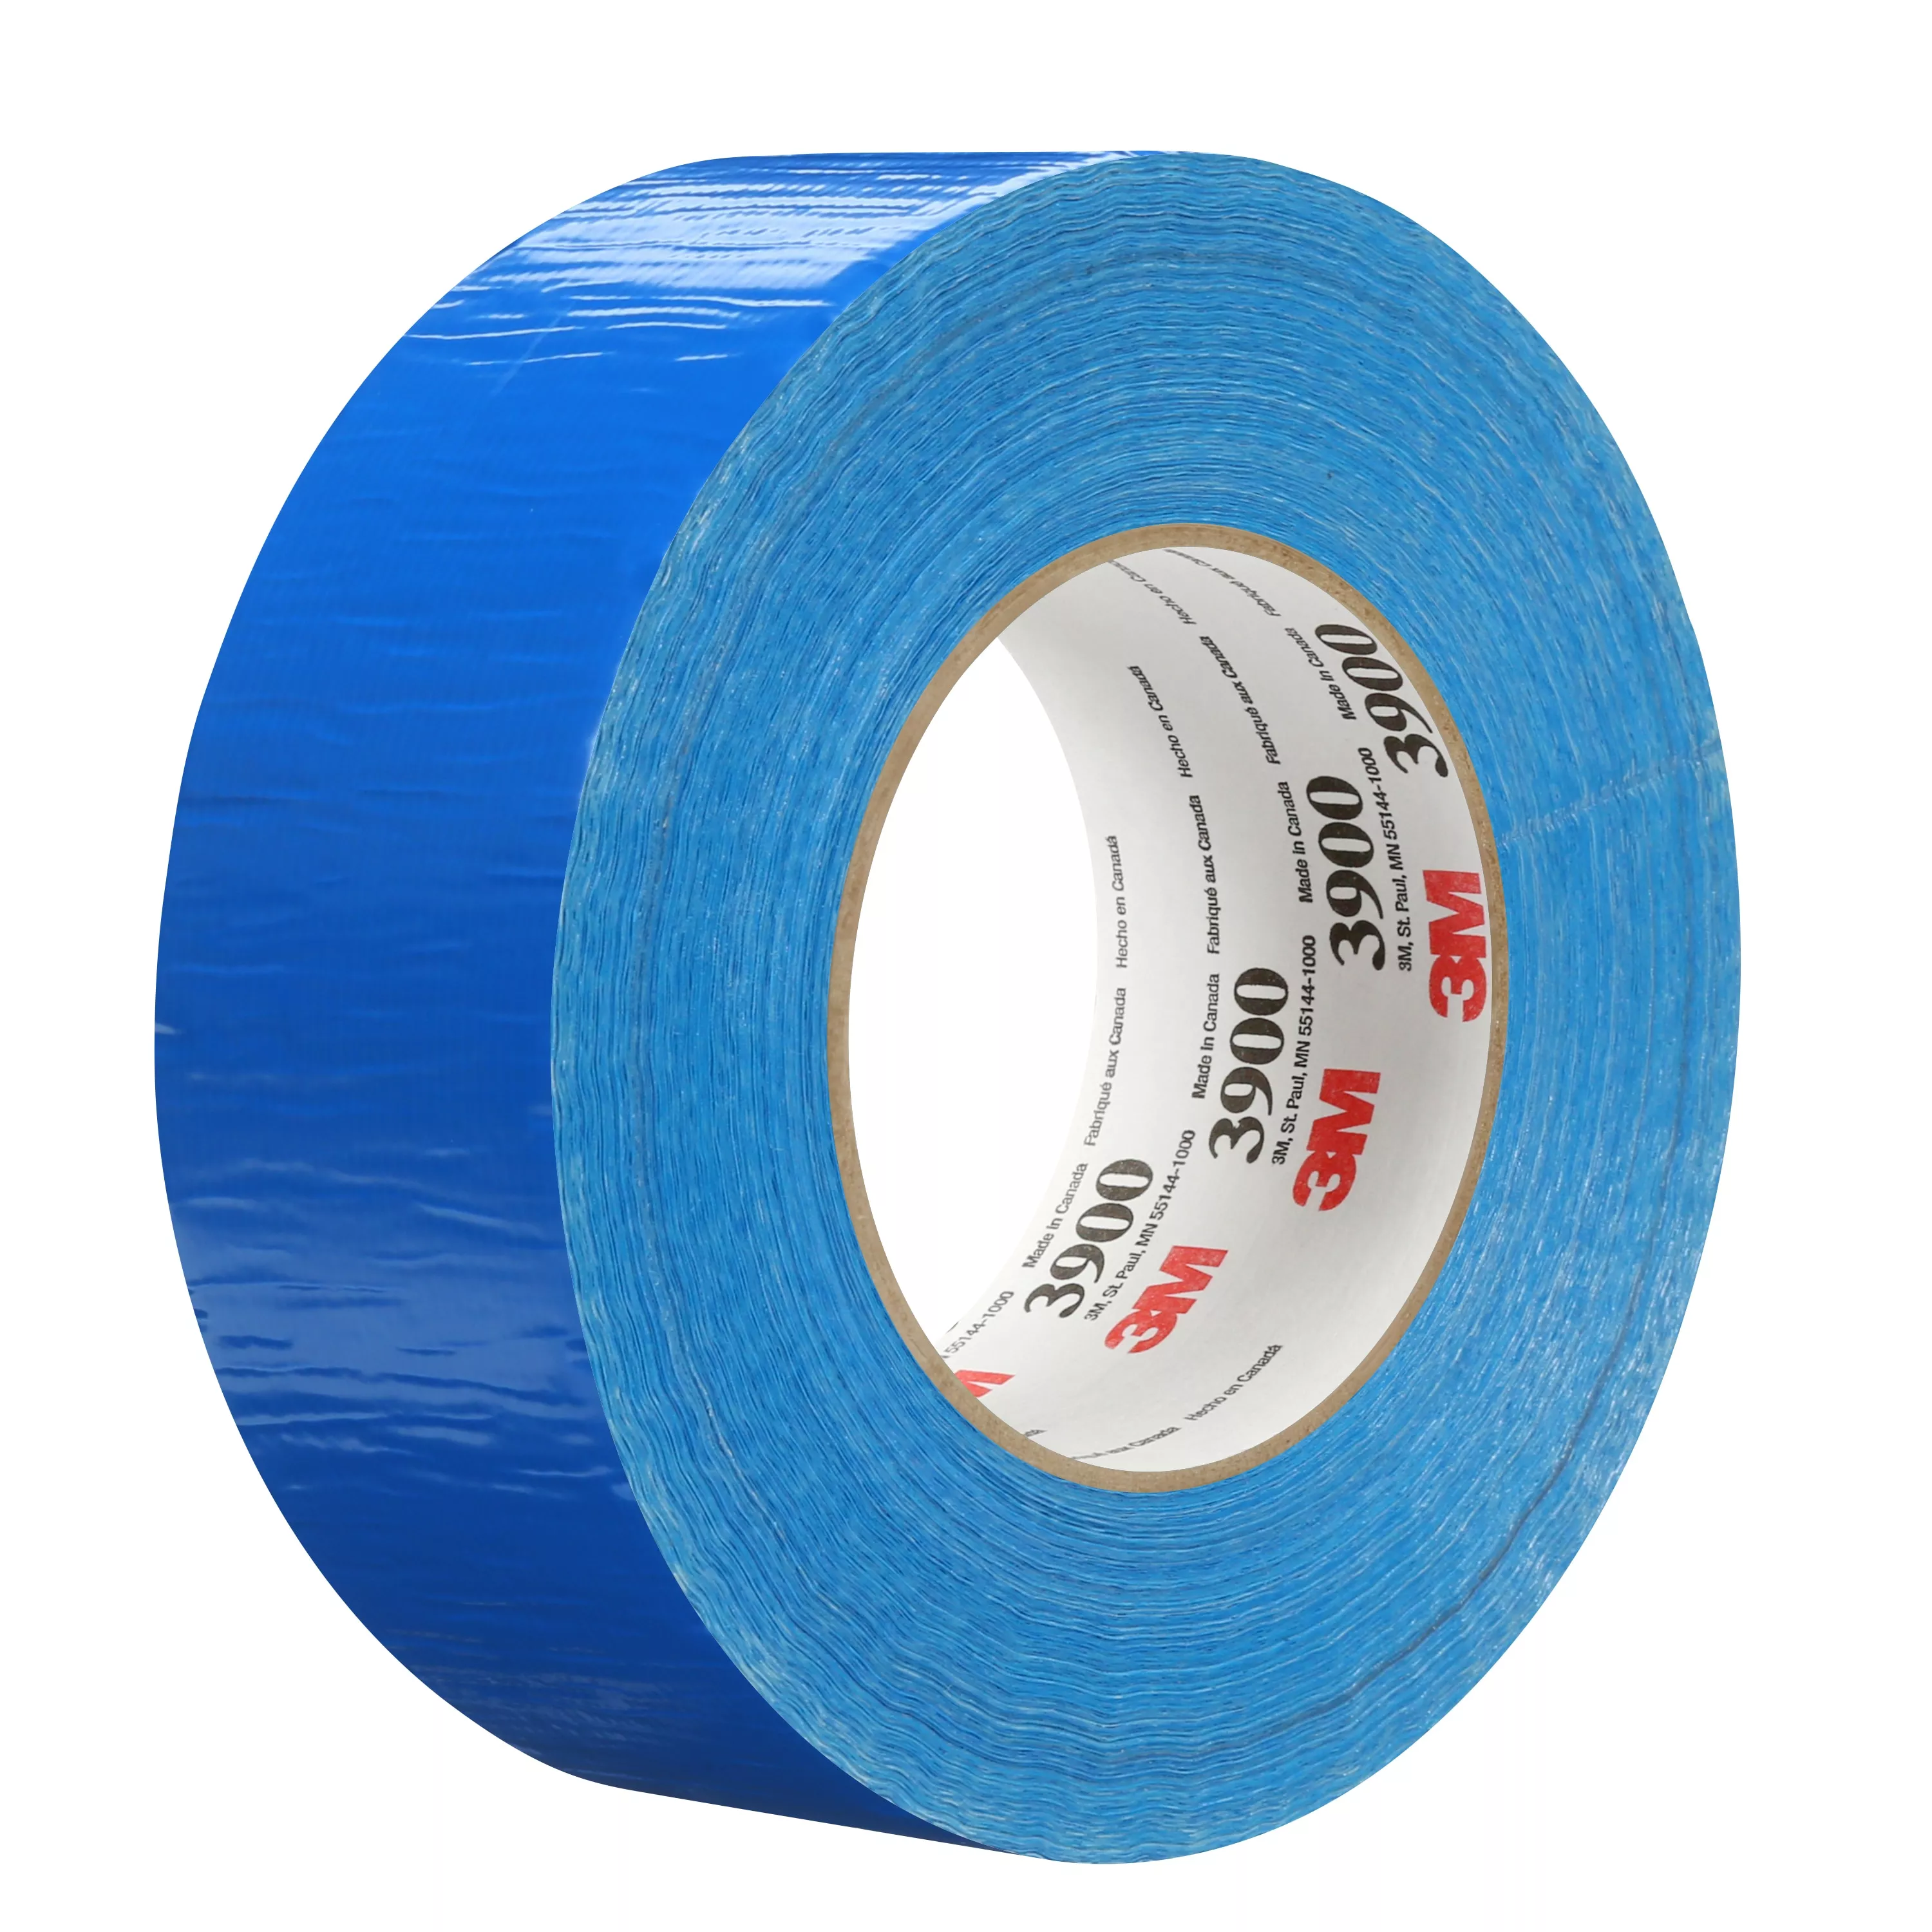 Product Number 3900 | 3M™ Multi-Purpose Duct Tape 3900